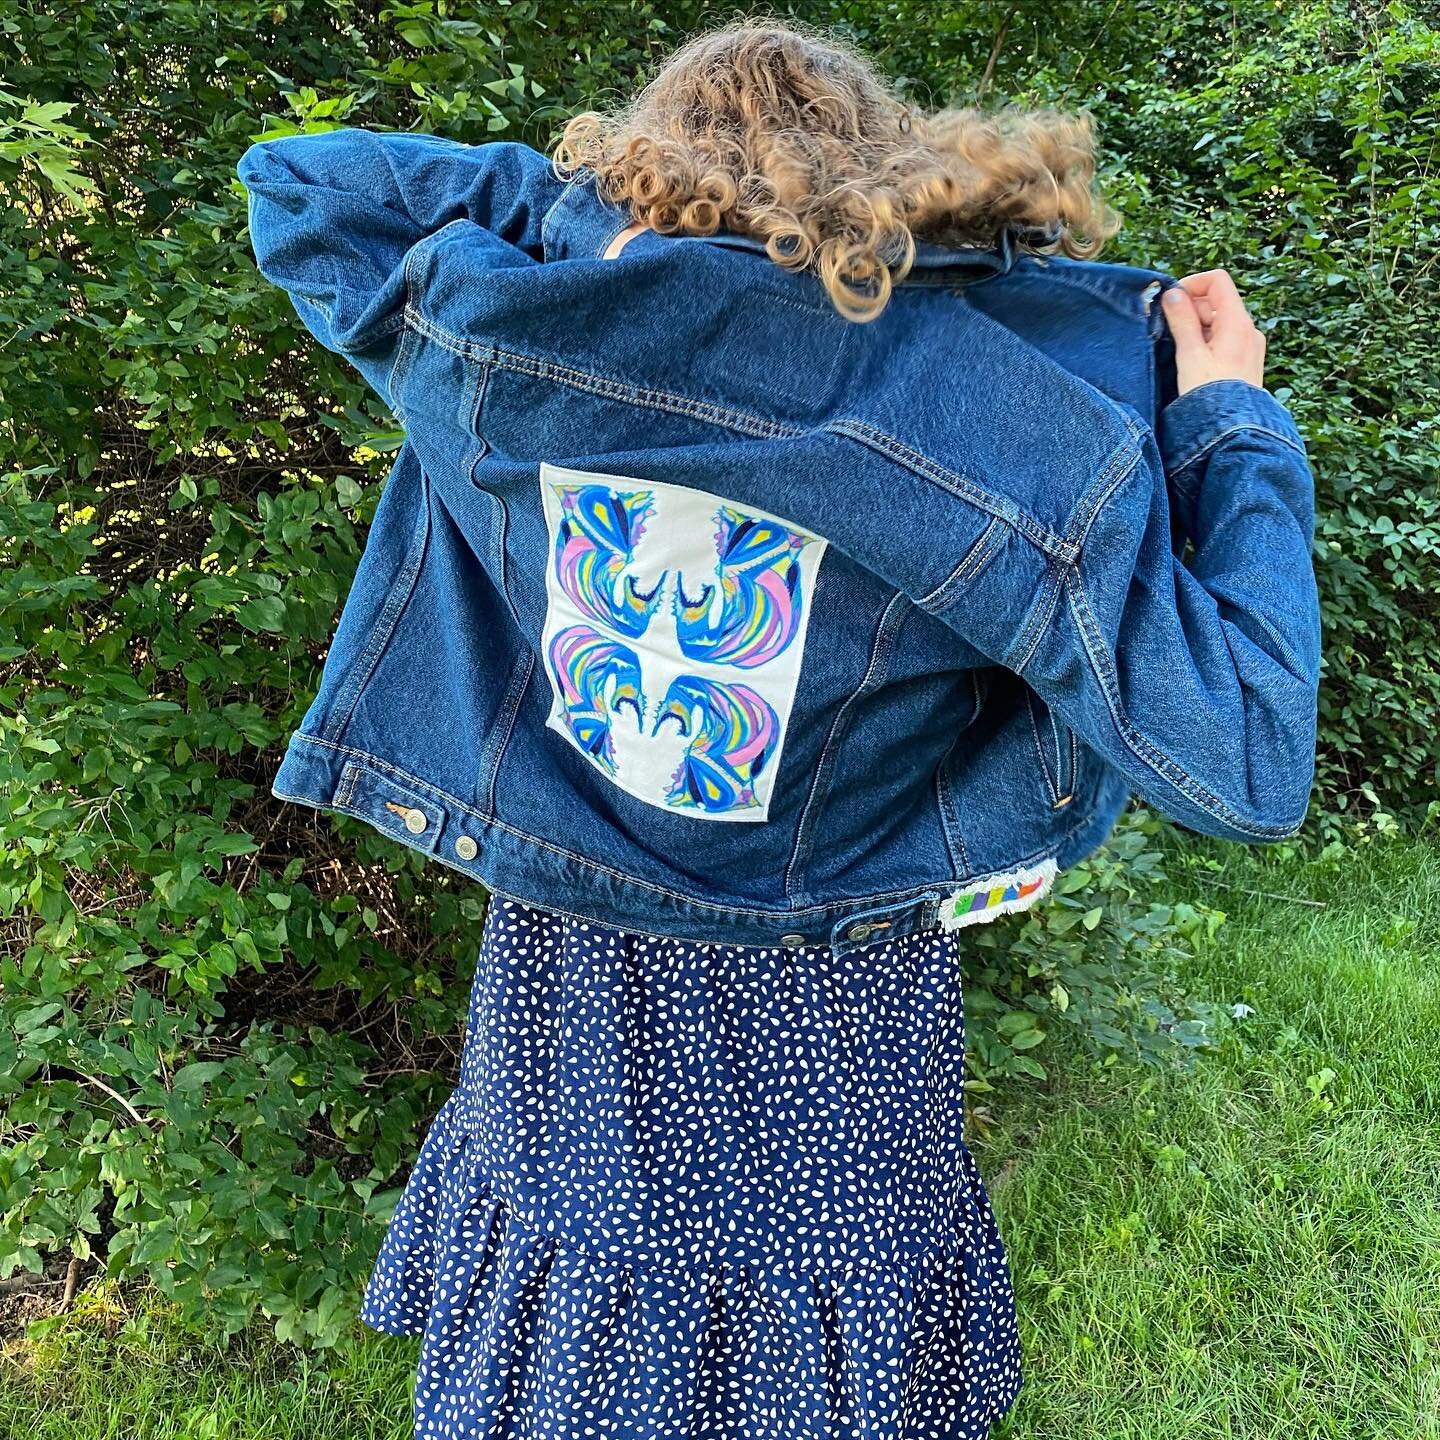 Spotted💥 #vivacevt #jeanjacket #smallbatch #fabricdesign #fabric #denim #vermont #mystyle